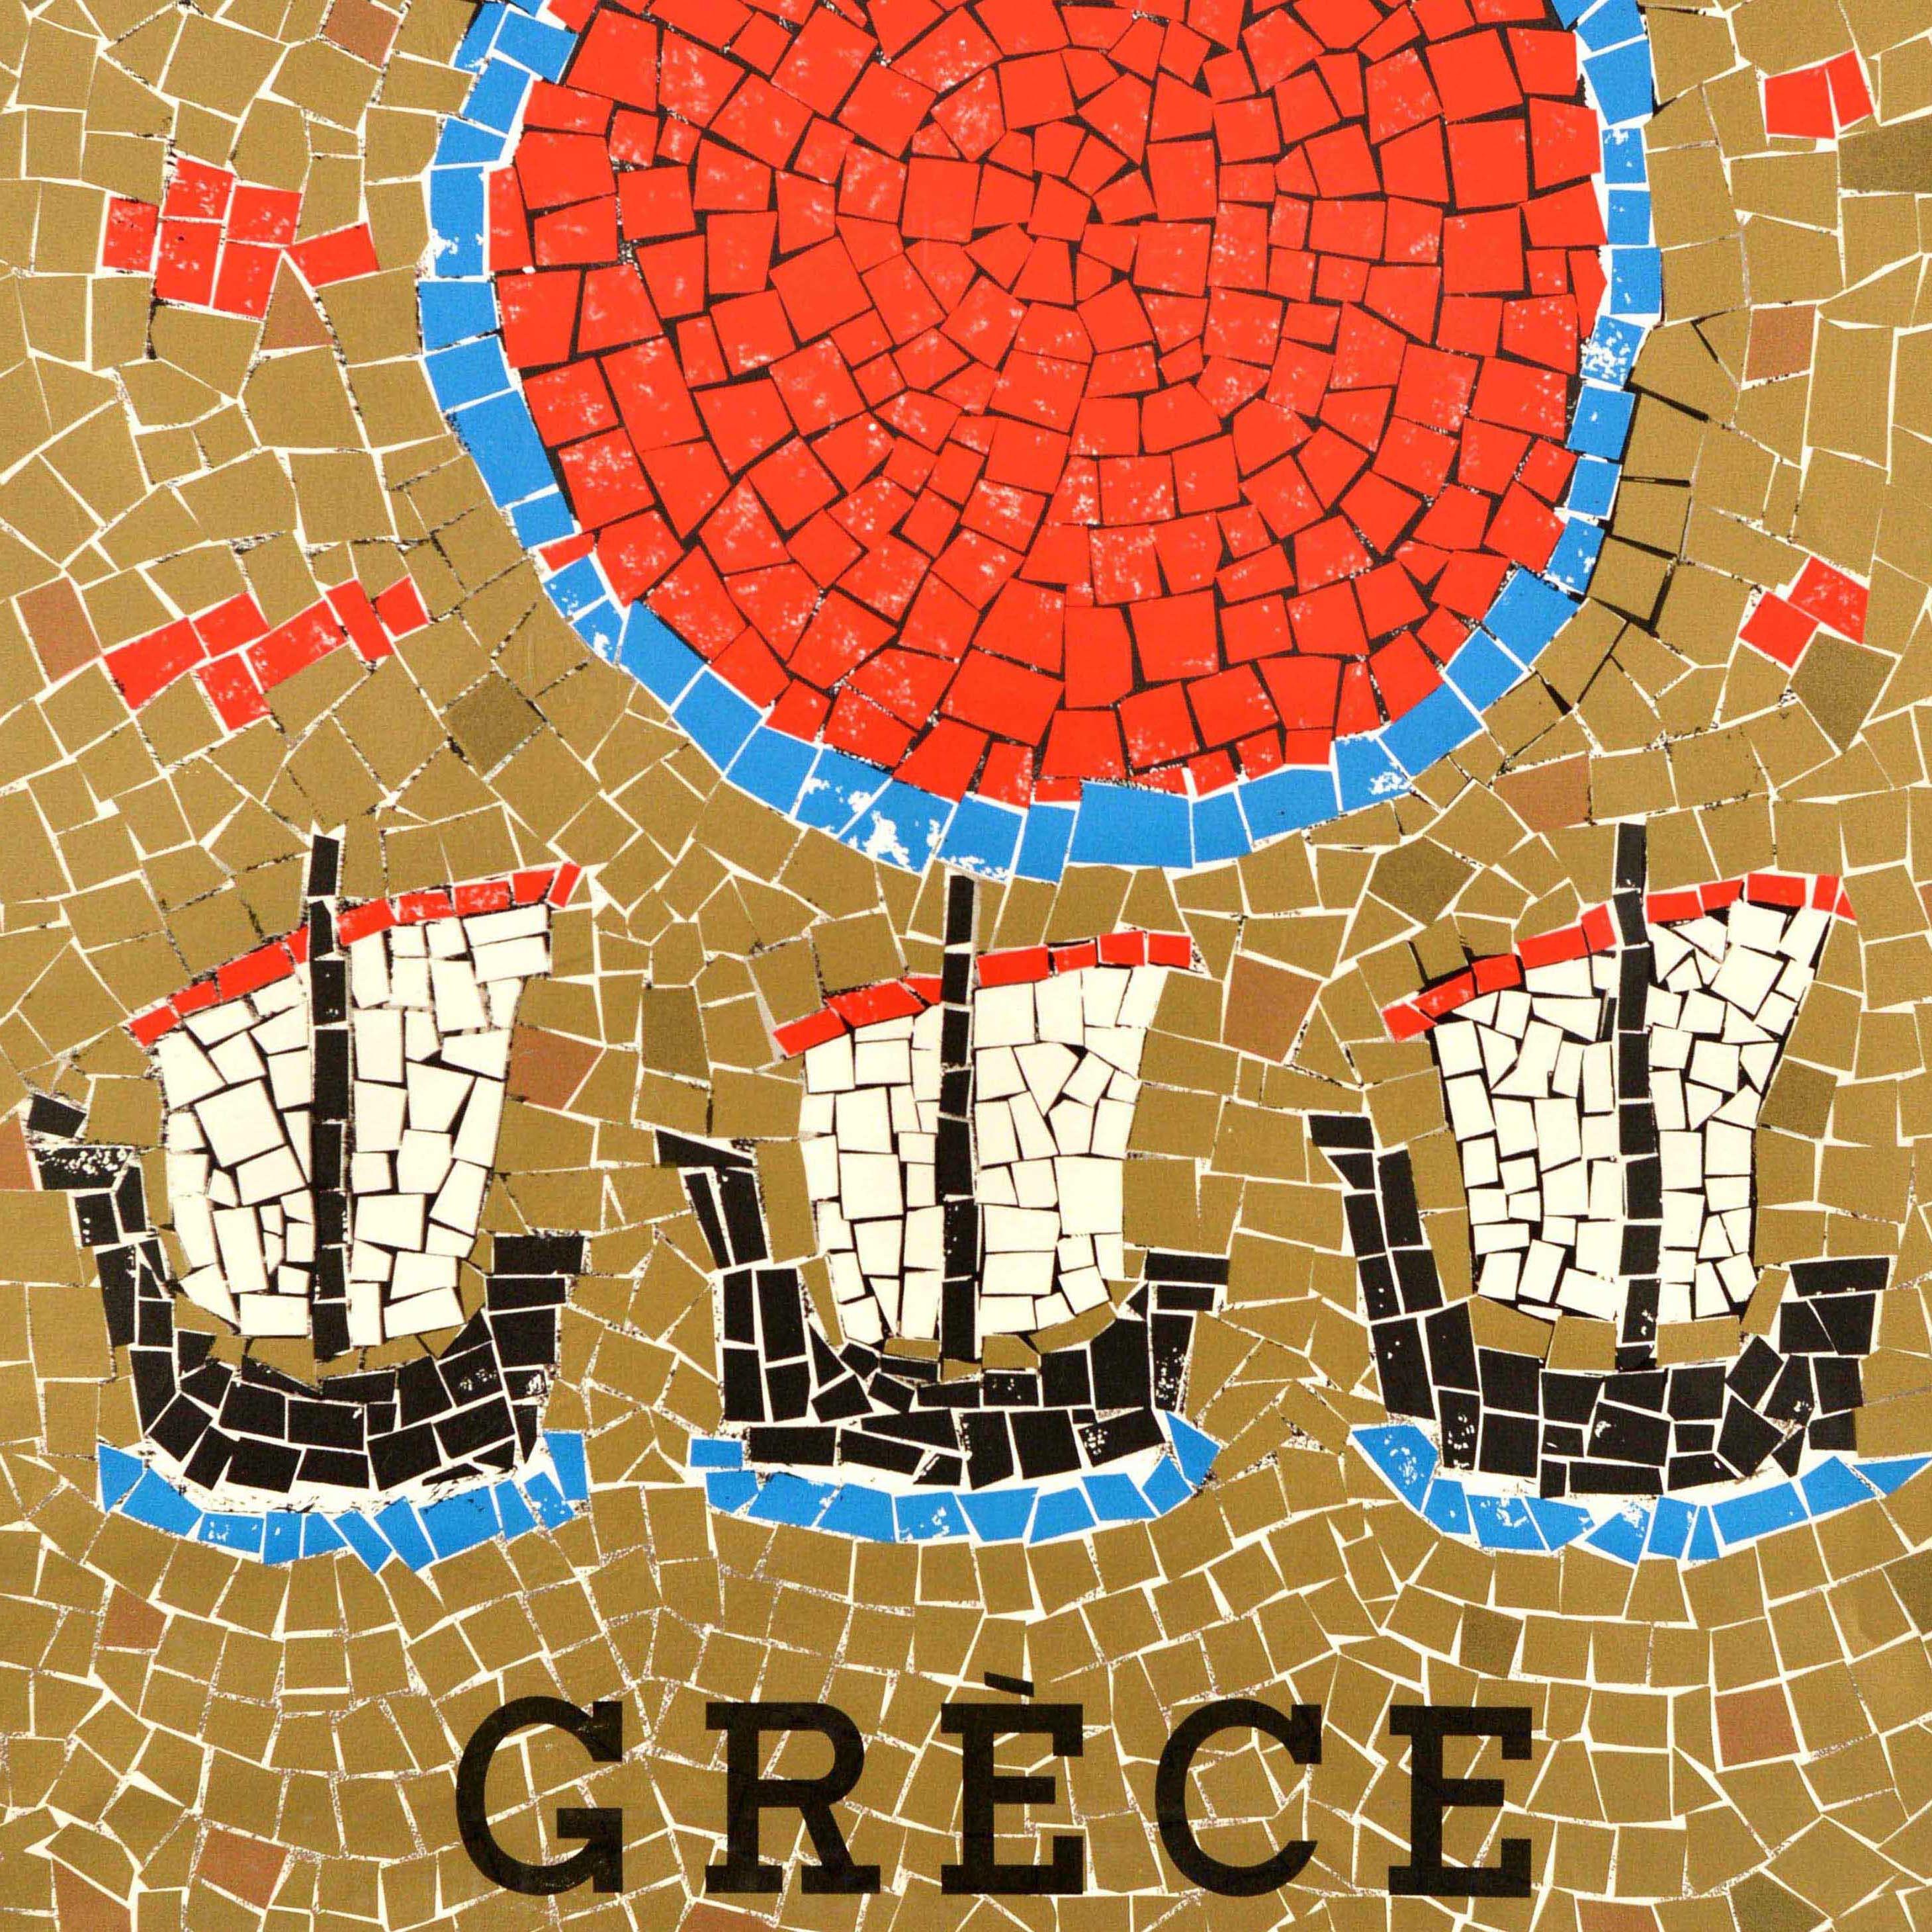 Original vintage travel poster for Greece - Griechenland - featuring a colourful mosaic style image depicting three sailing boats with a bright sun in the sky. Good condition, creasing, tears, pinholes, small paper losses on edges.